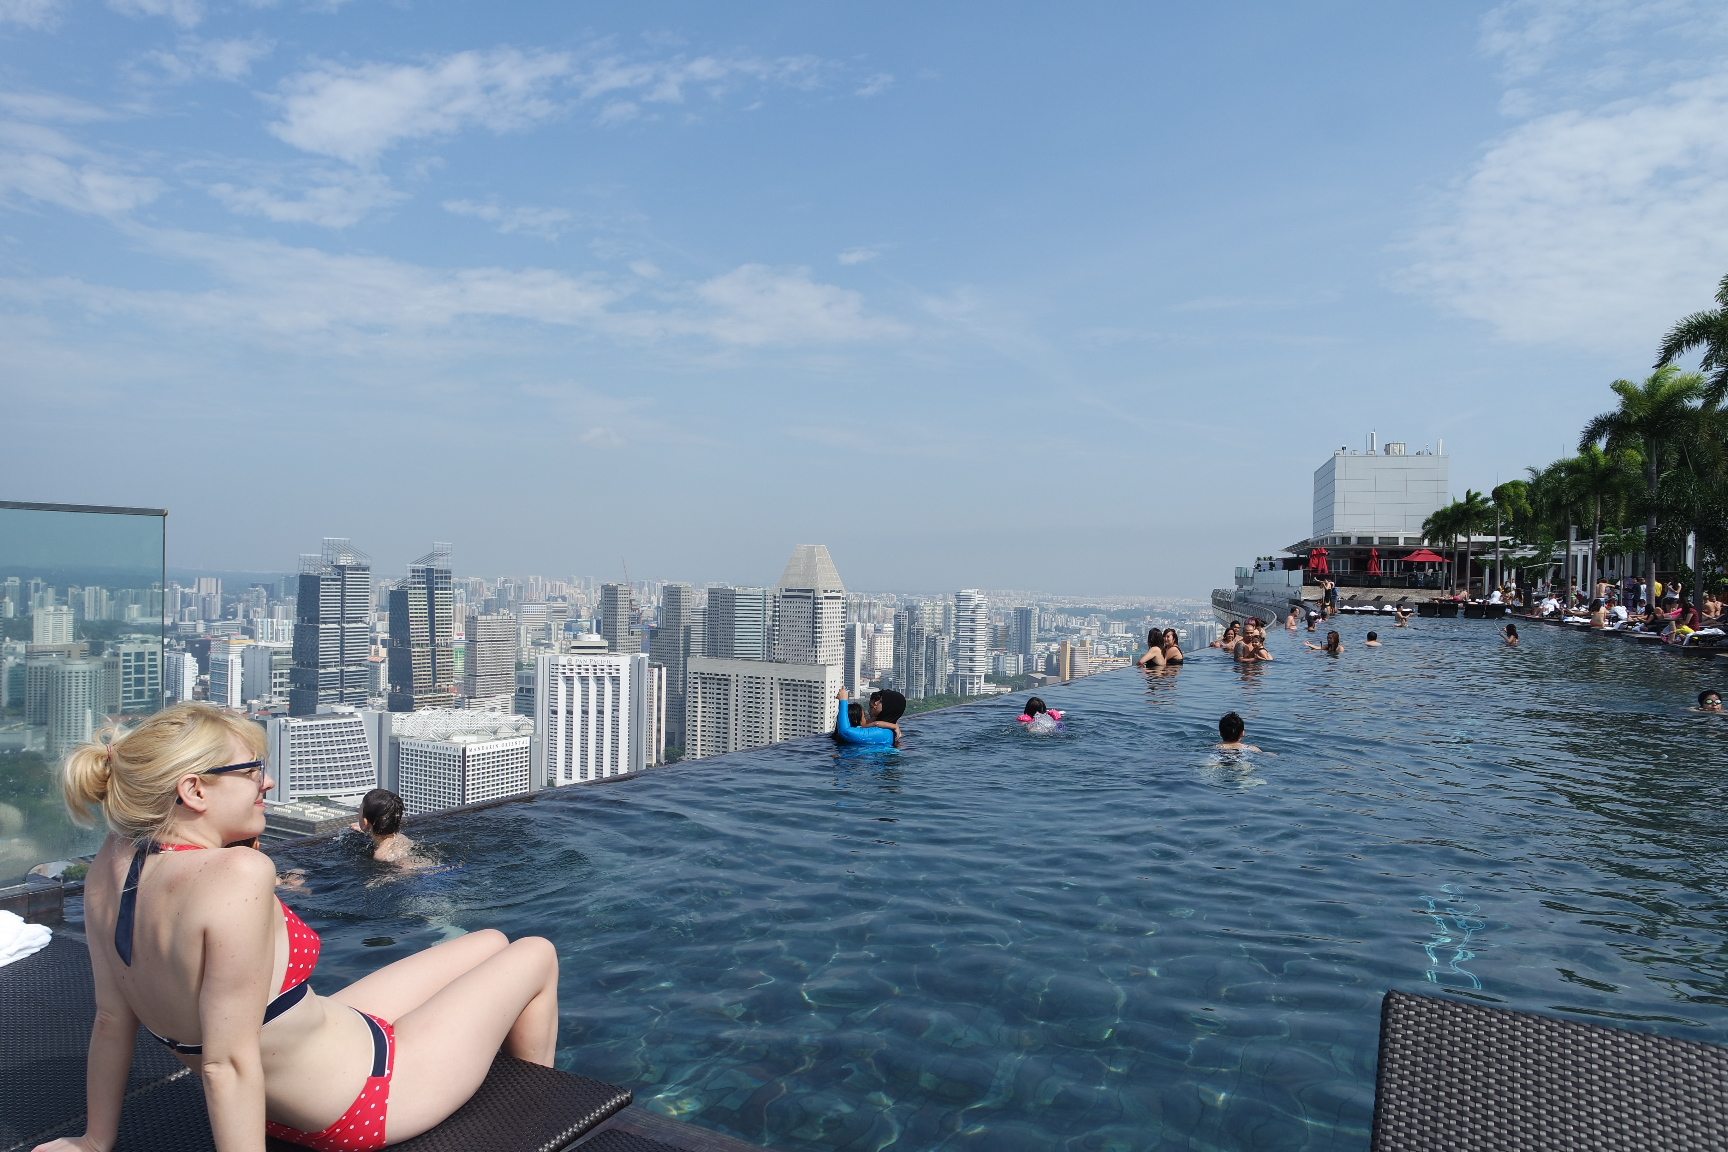 Marina Bay Sands World’s Largest Rooftop Infinity Pool